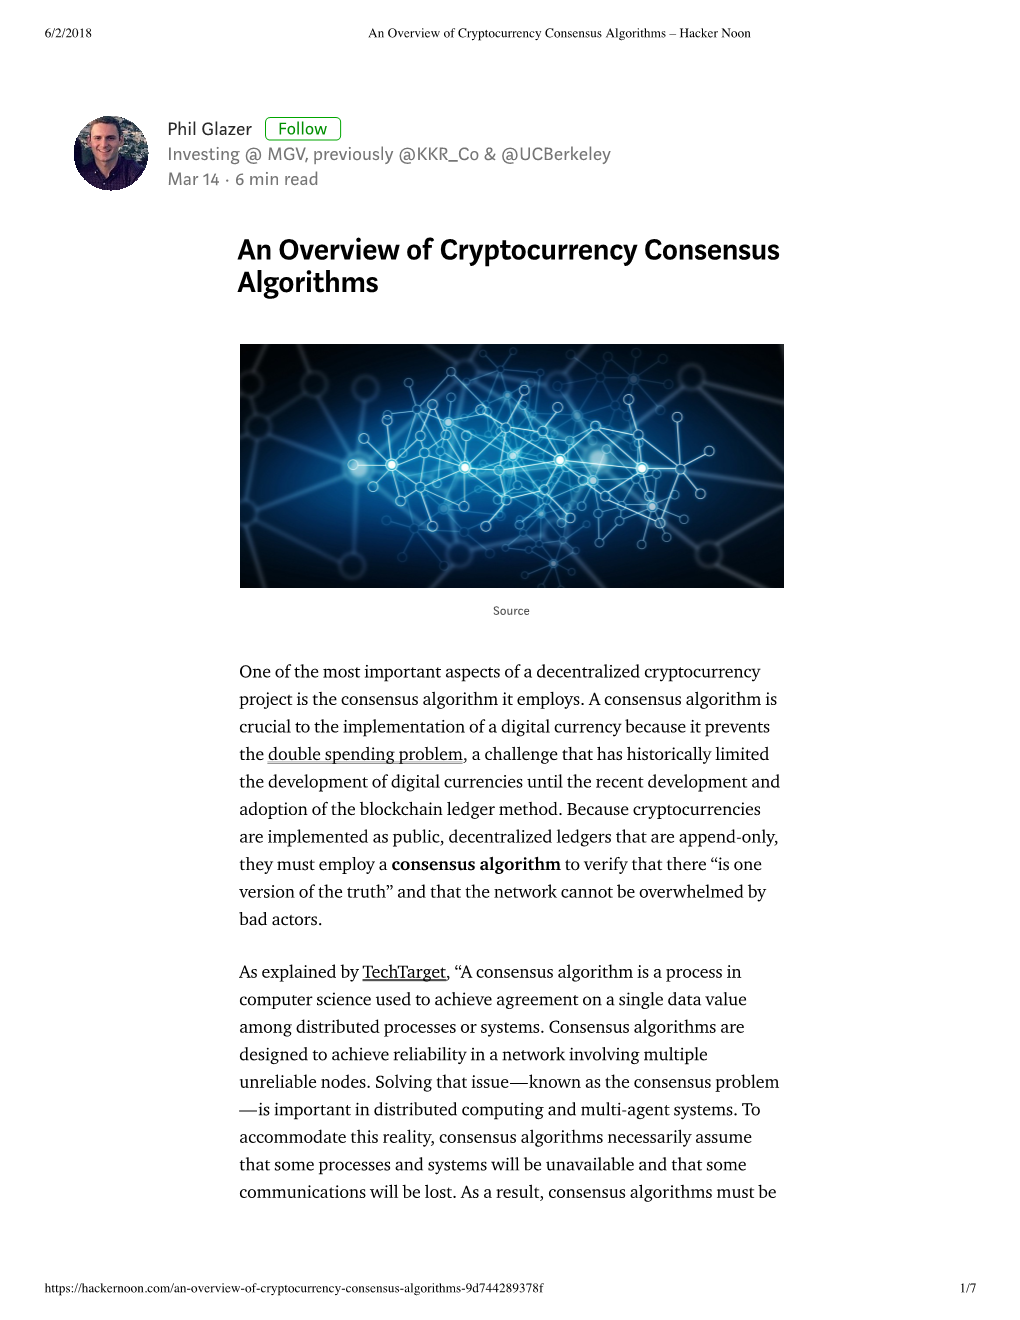 An Overview of Cryptocurrency Consensus Algorithms – Hacker Noon